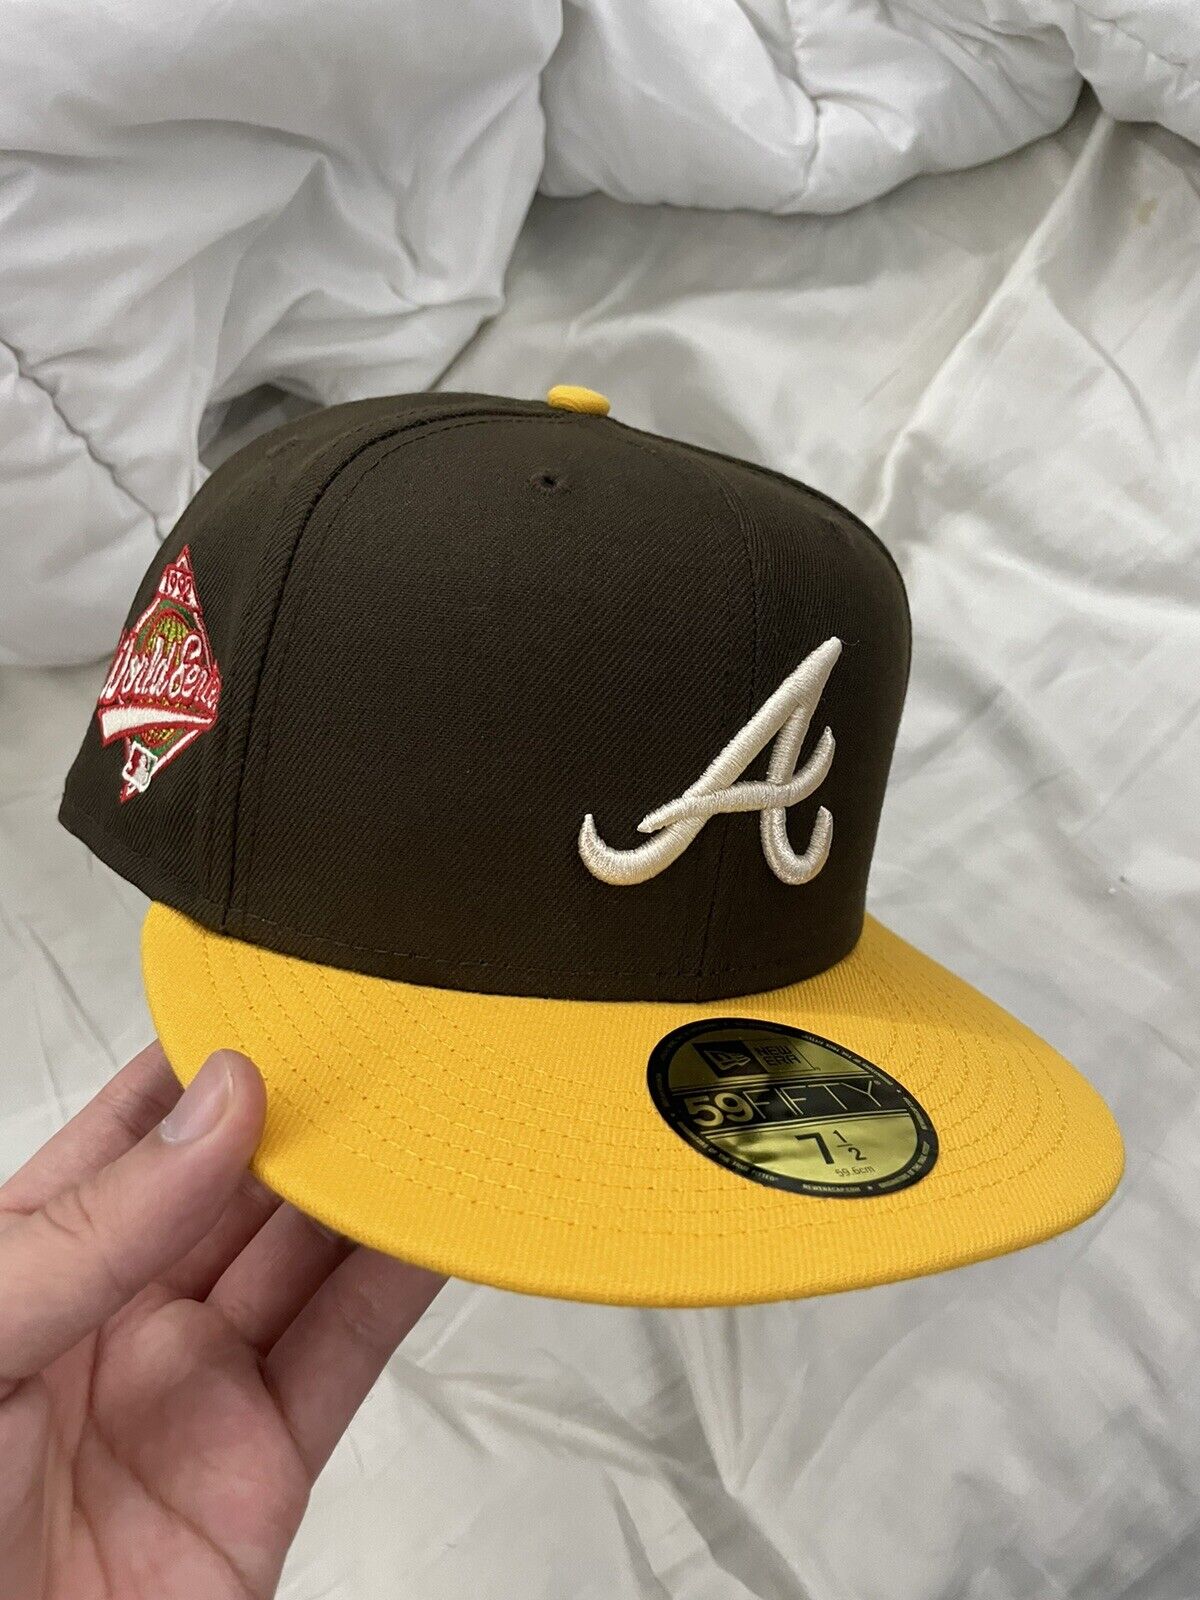 Hat Club Exclusive Manolo Collection, Atlanta Braves (SIZE: 73/4